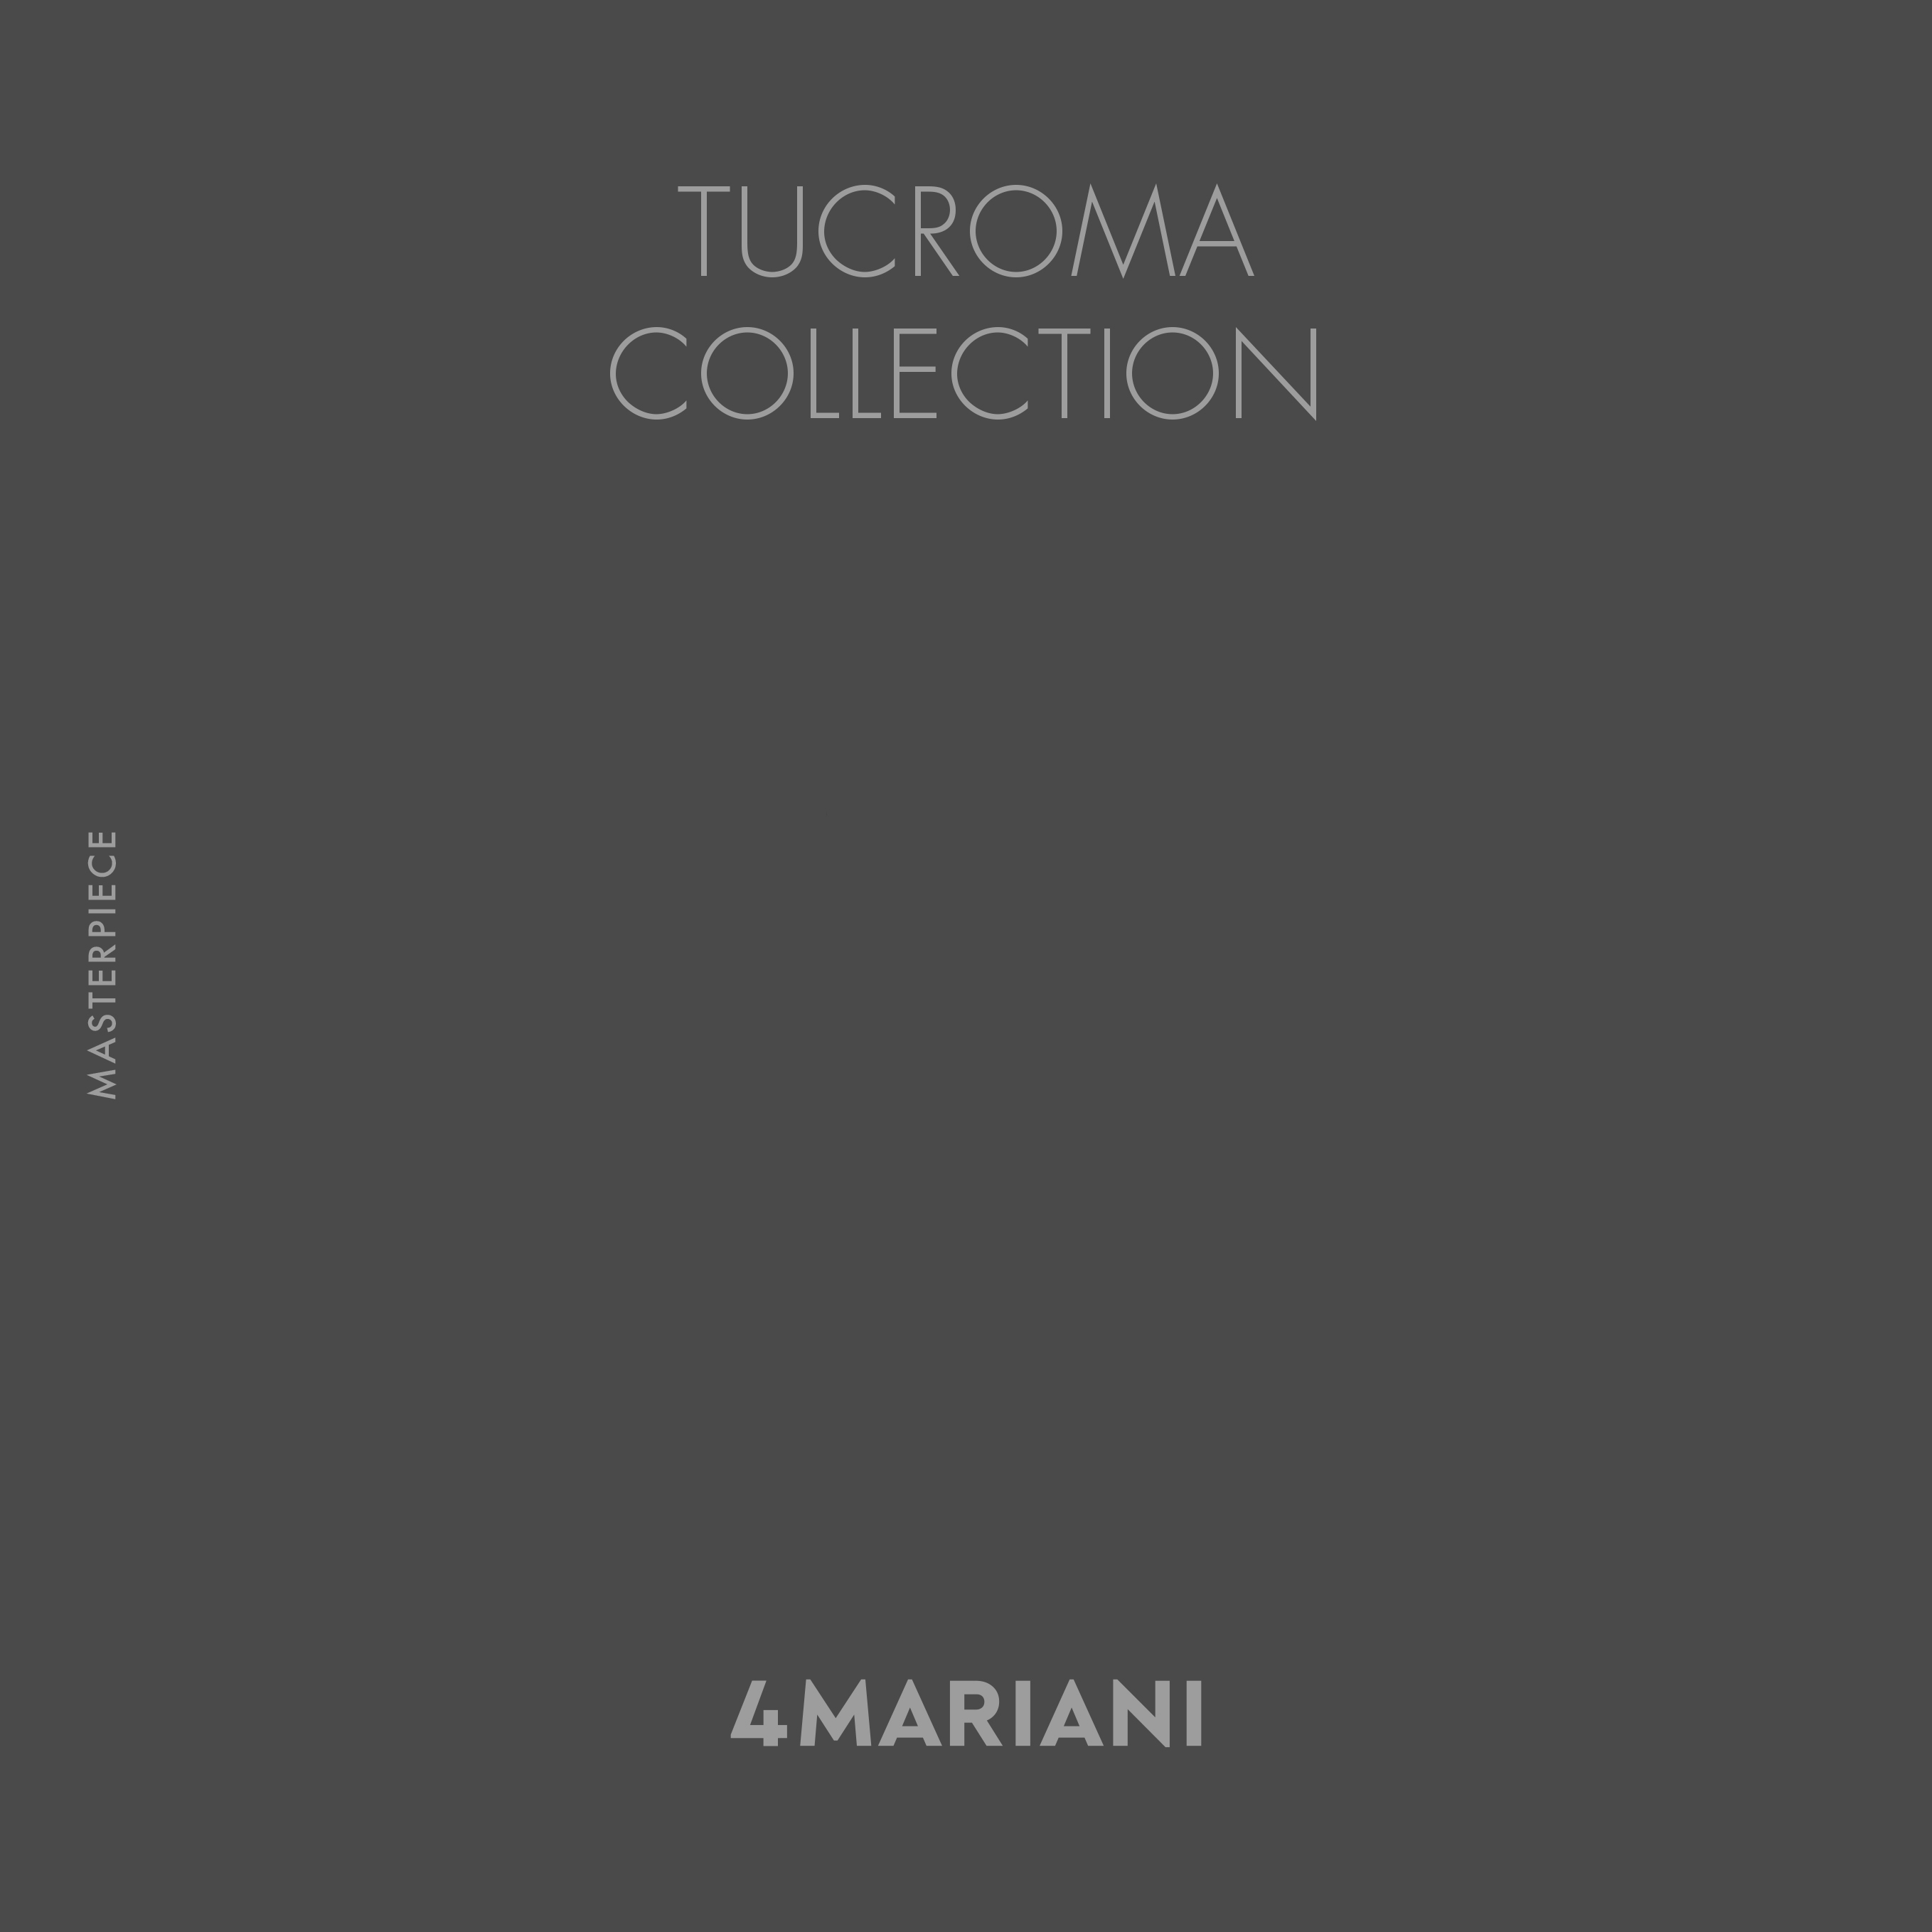 Tucroma Collection